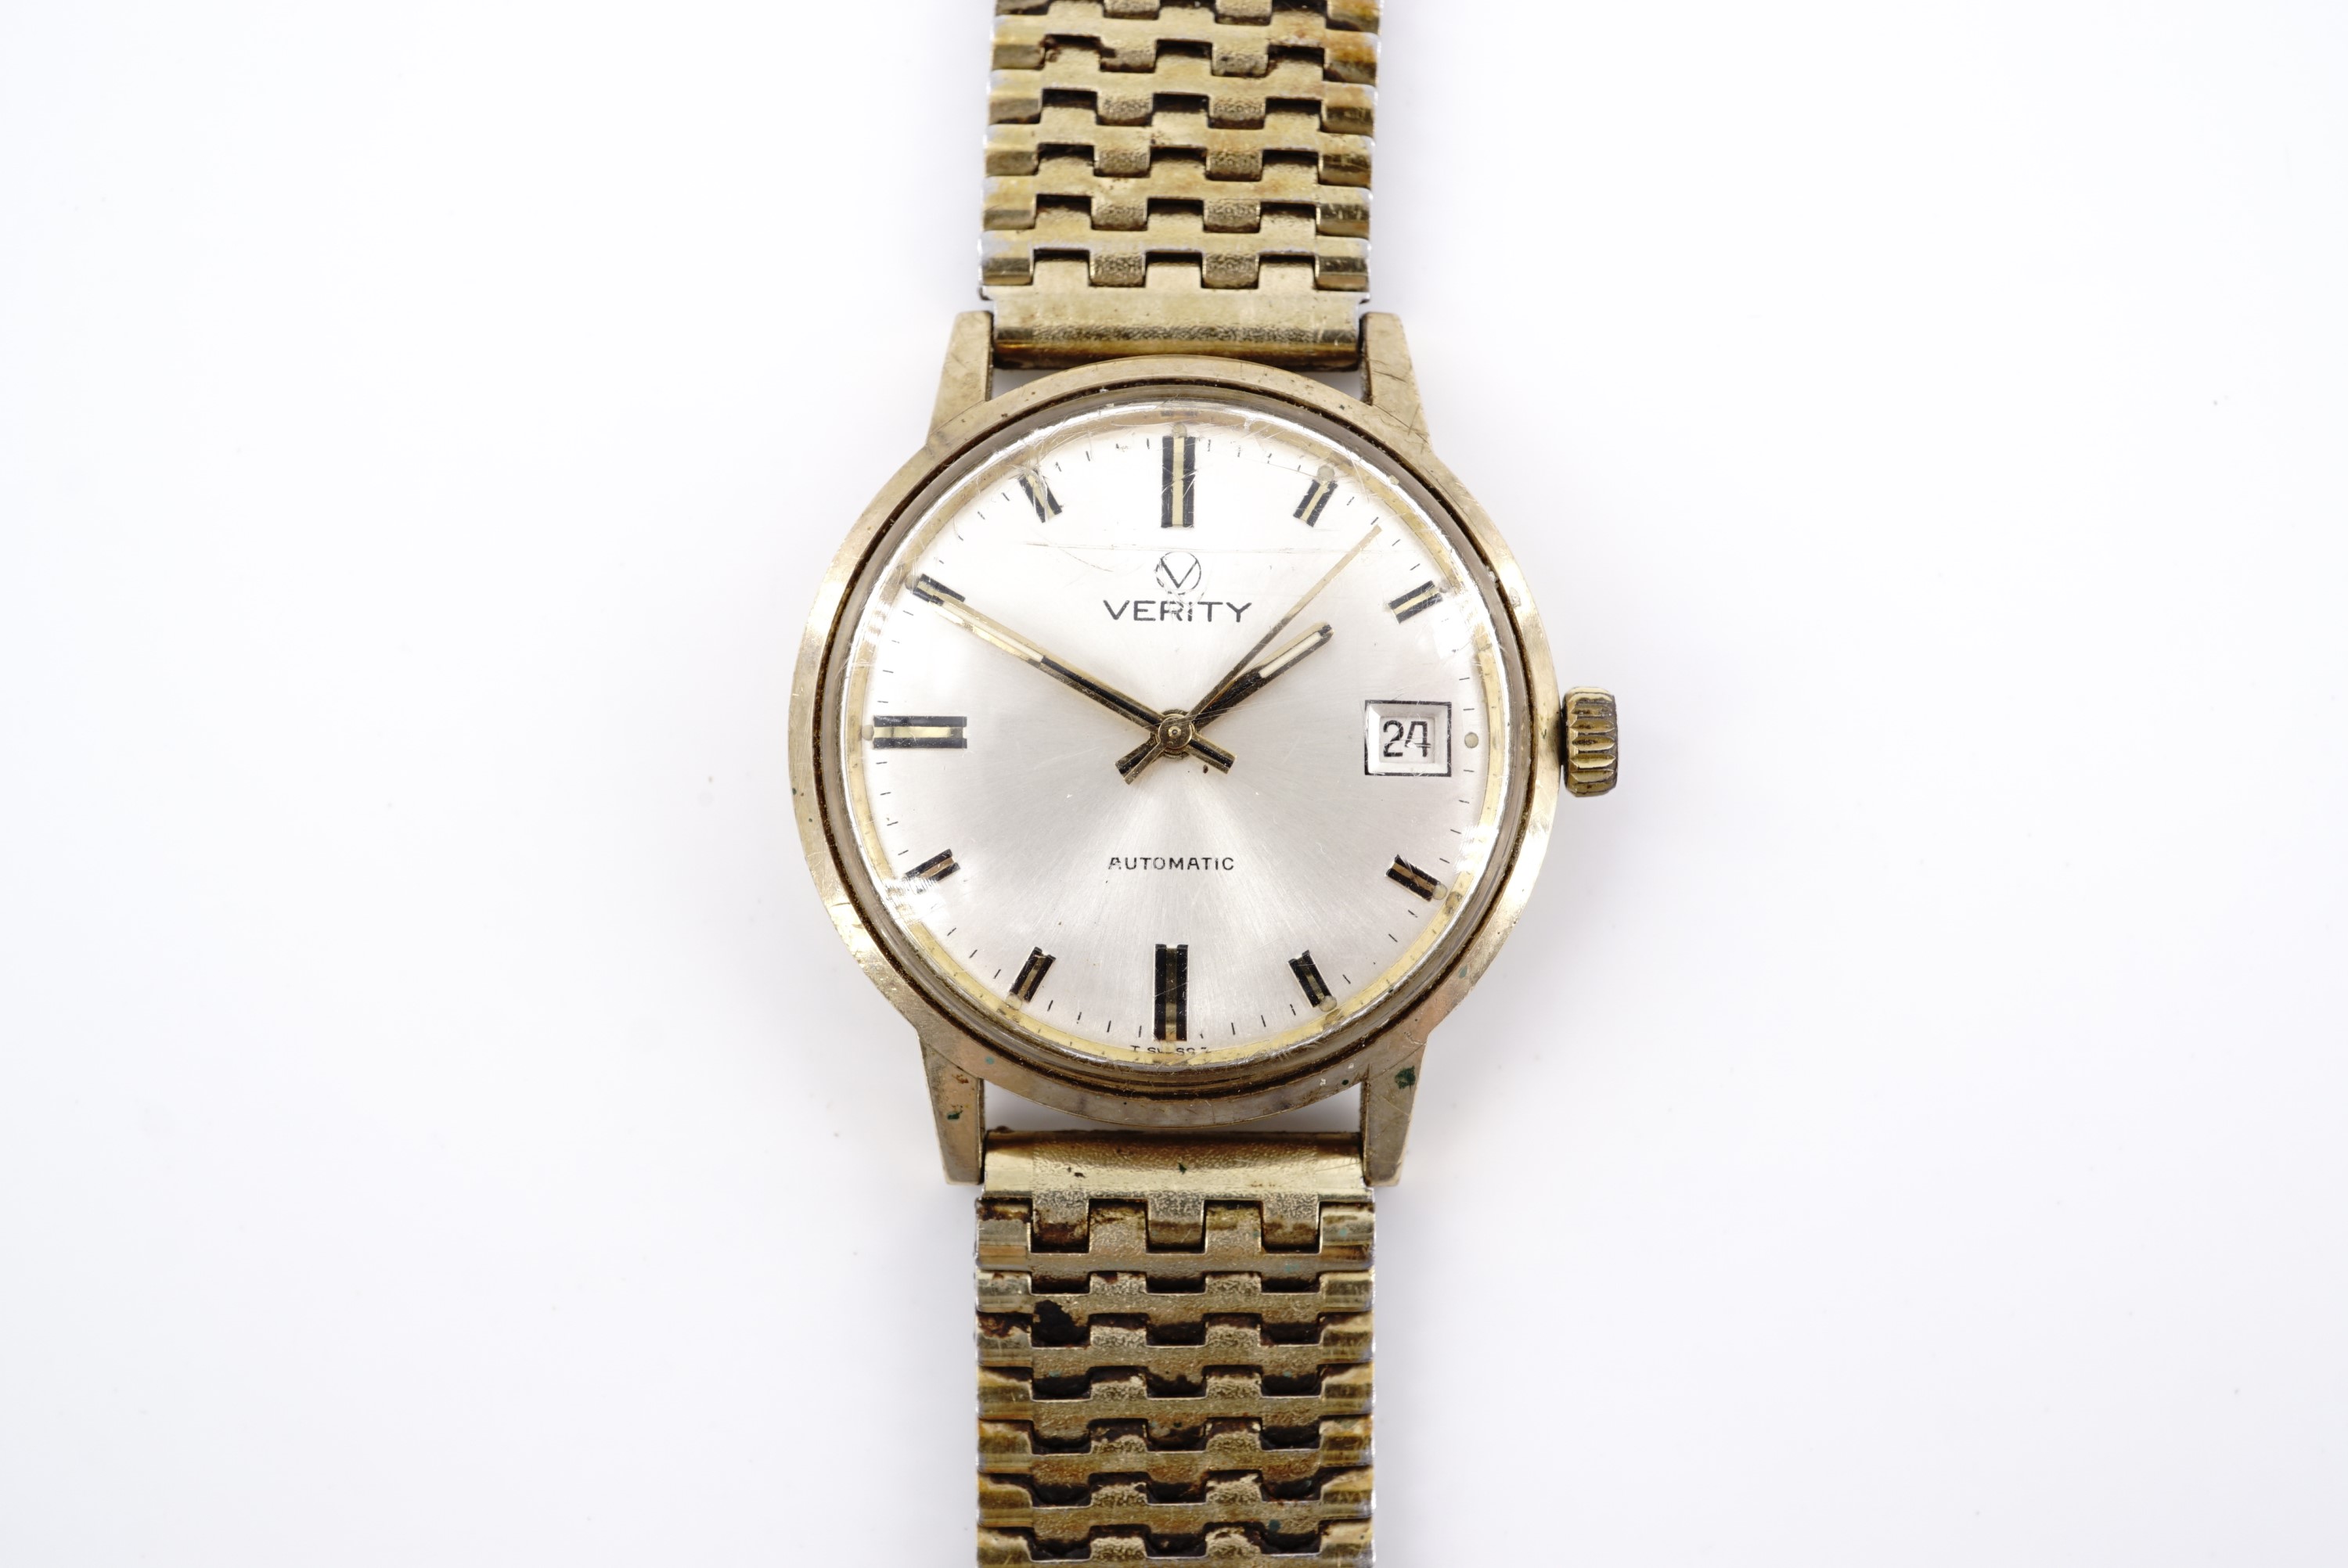 A 1970s Verity 9 ct gold wristwatch, having an automatic movement and radially brushed silver face